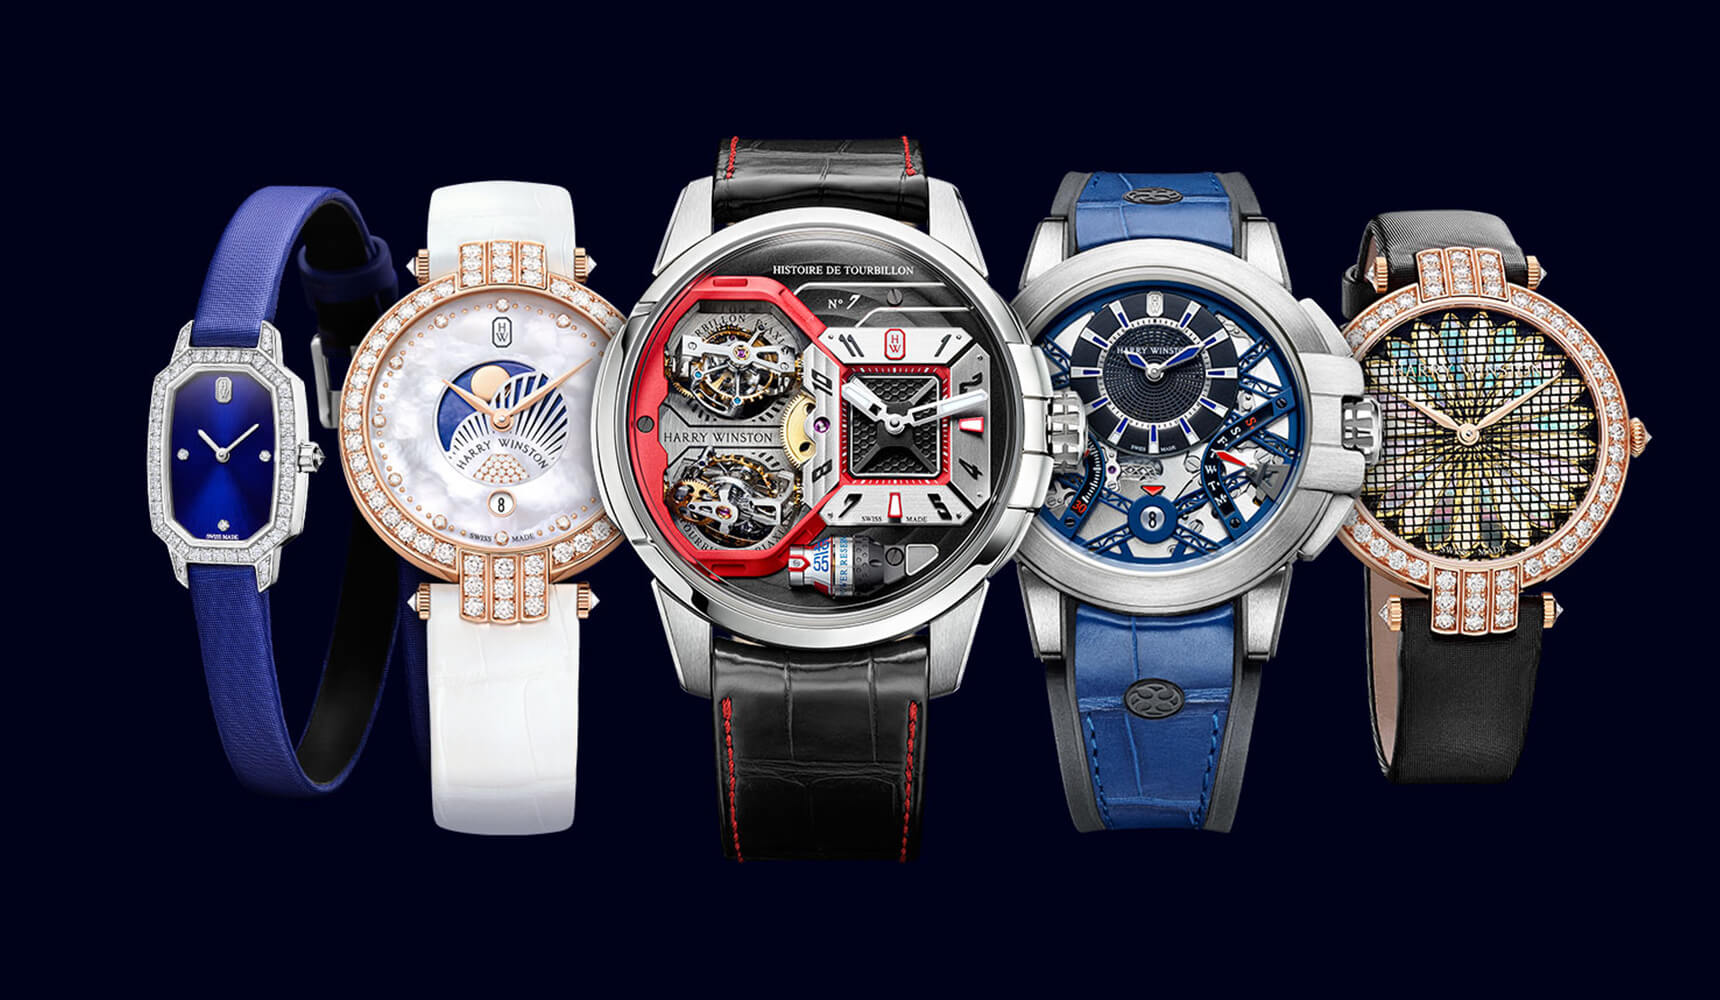 Baselworld 2019 - Bell & Ross x Renault F1 RS19 Collection (Specs & Price)  | Skeleton watches, Luxury watches for men, Bell & ross